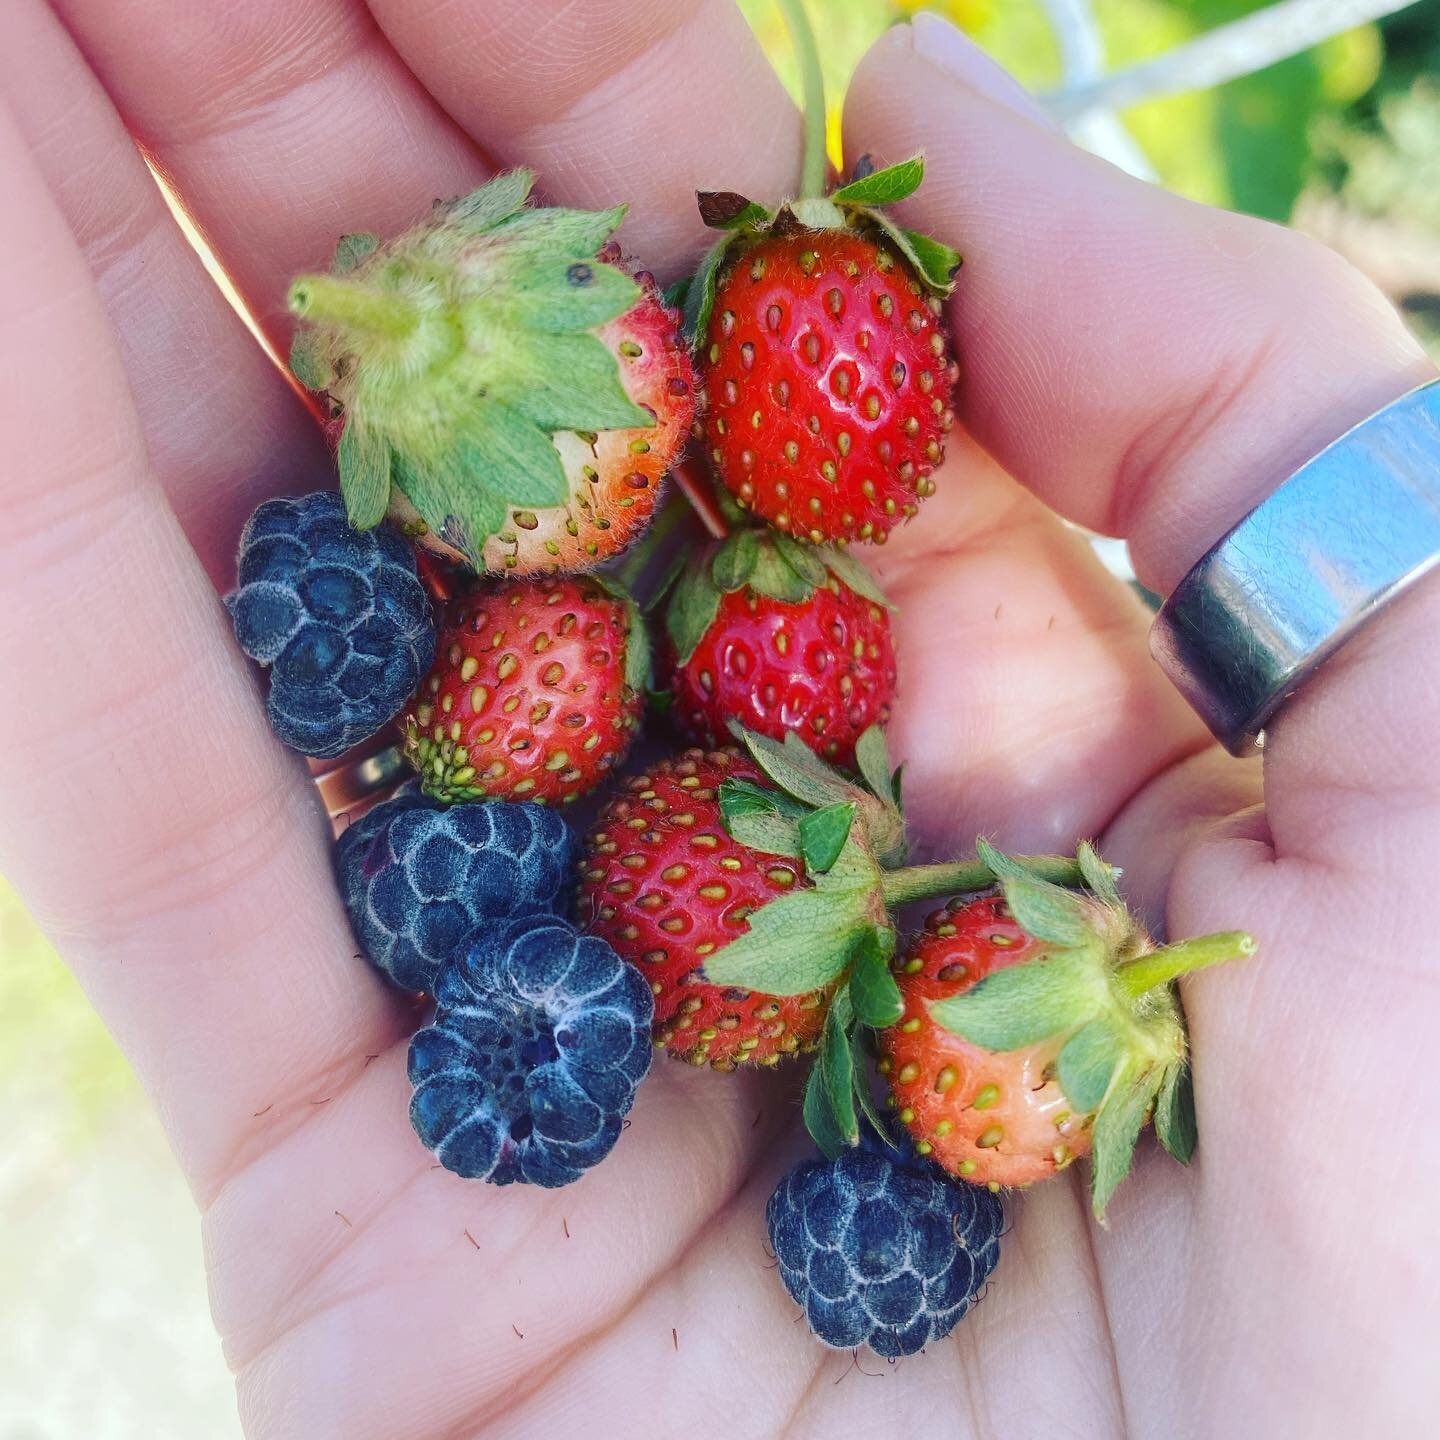 Did you know&hellip;

Berries are a high fiber, low sugar fruit choice! They&rsquo;re also packed full of antioxidants to protect against cellular damage.

Plus they&rsquo;re easy to grow - and gardening has its own mood and health promoting benefits